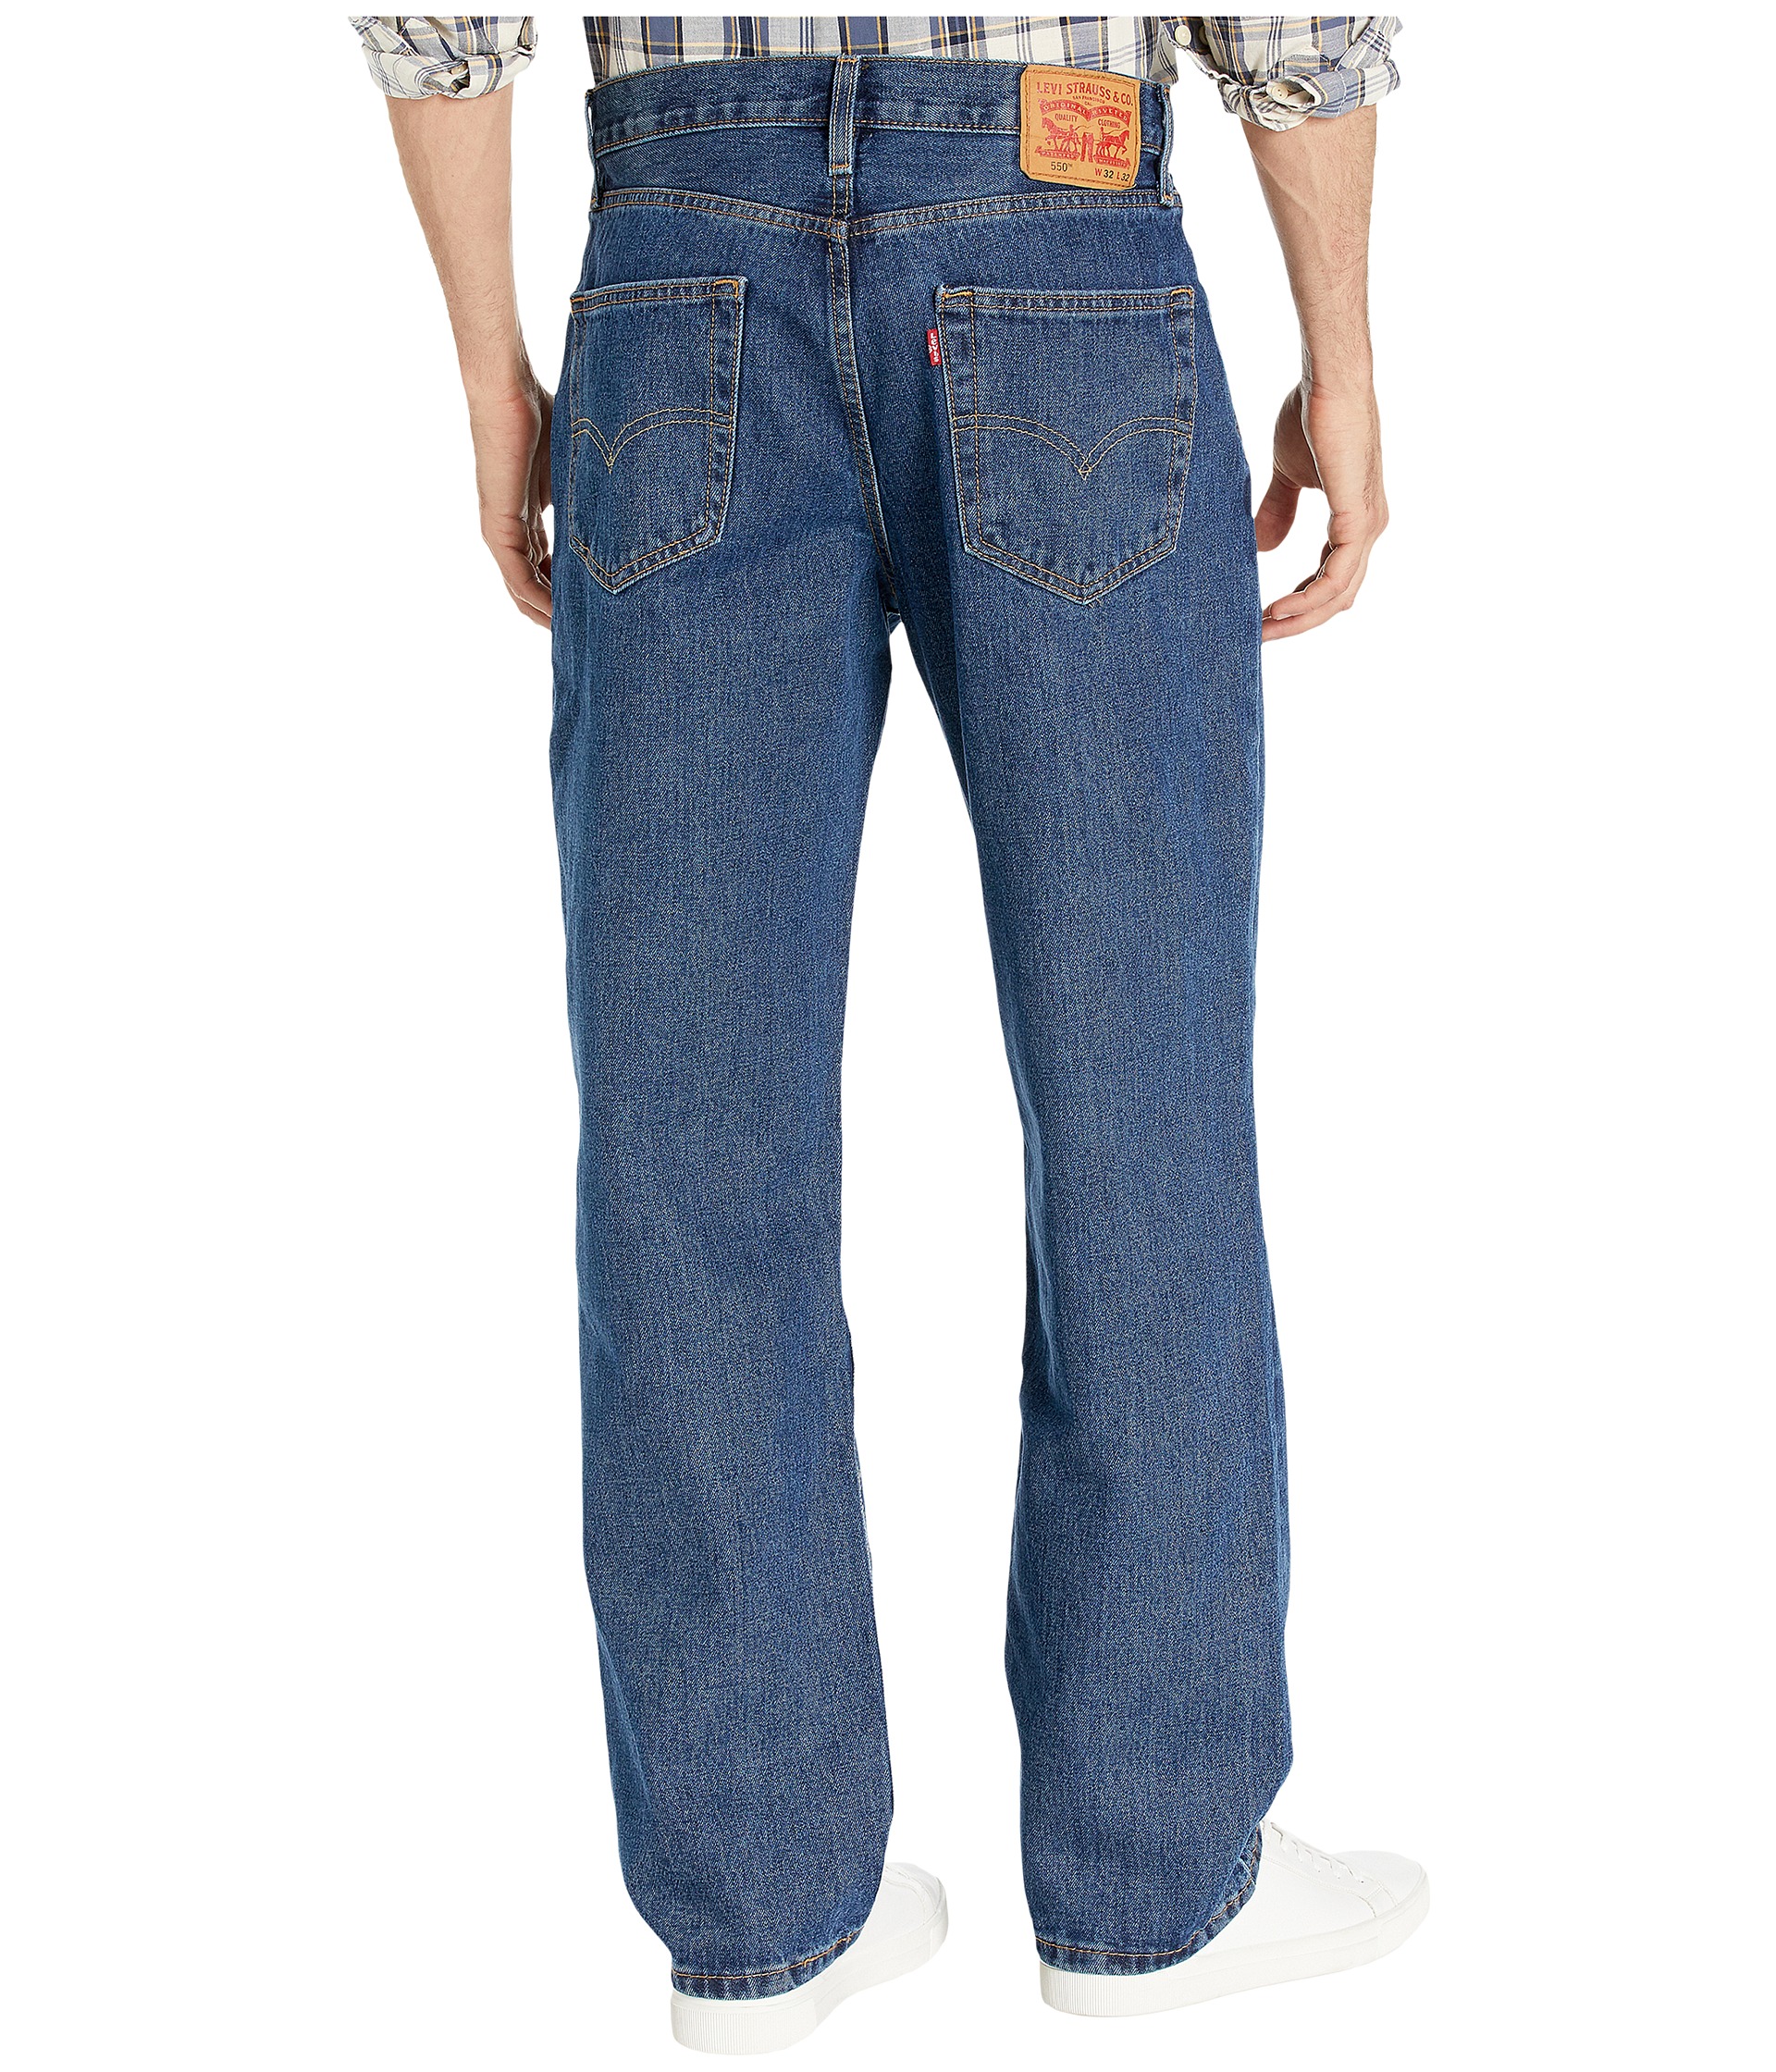 Levi's® Mens 550™ Relaxed Fit - Zappos.com Free Shipping BOTH Ways